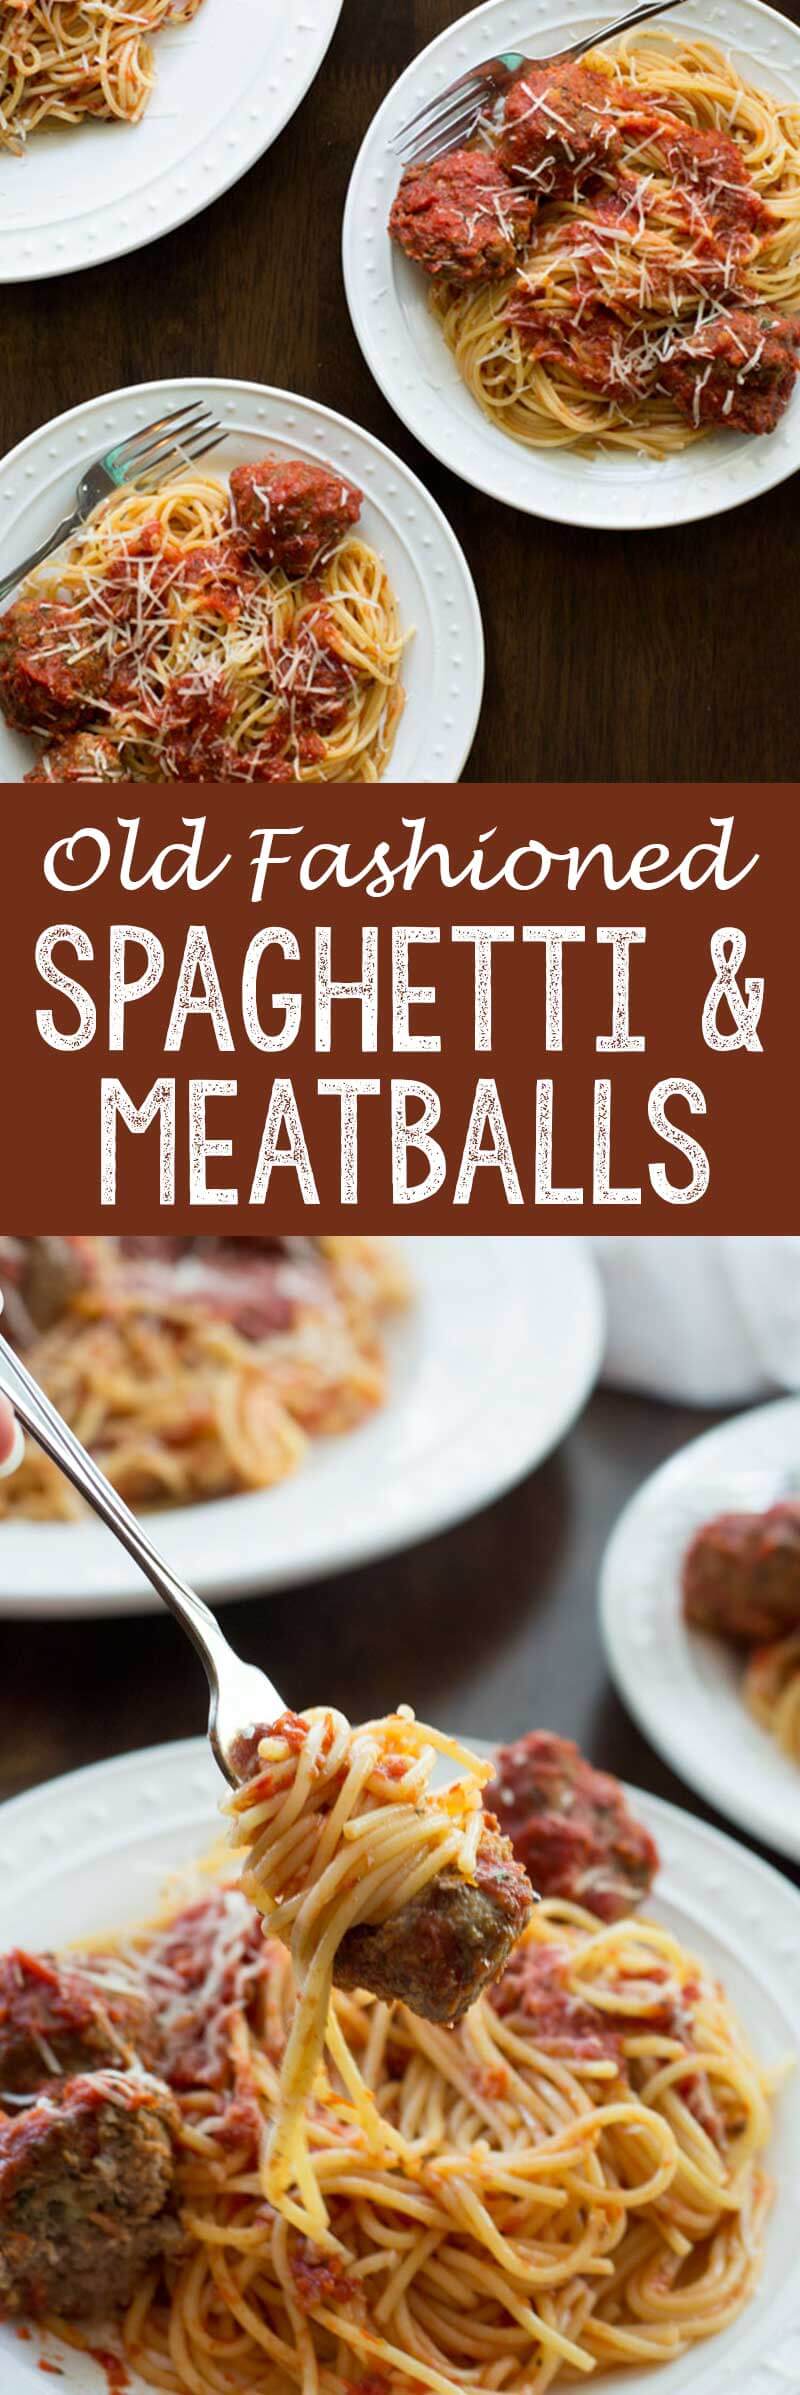 Old fashioned spaghetti and meatballs is better than grandma made and absolutely delicious